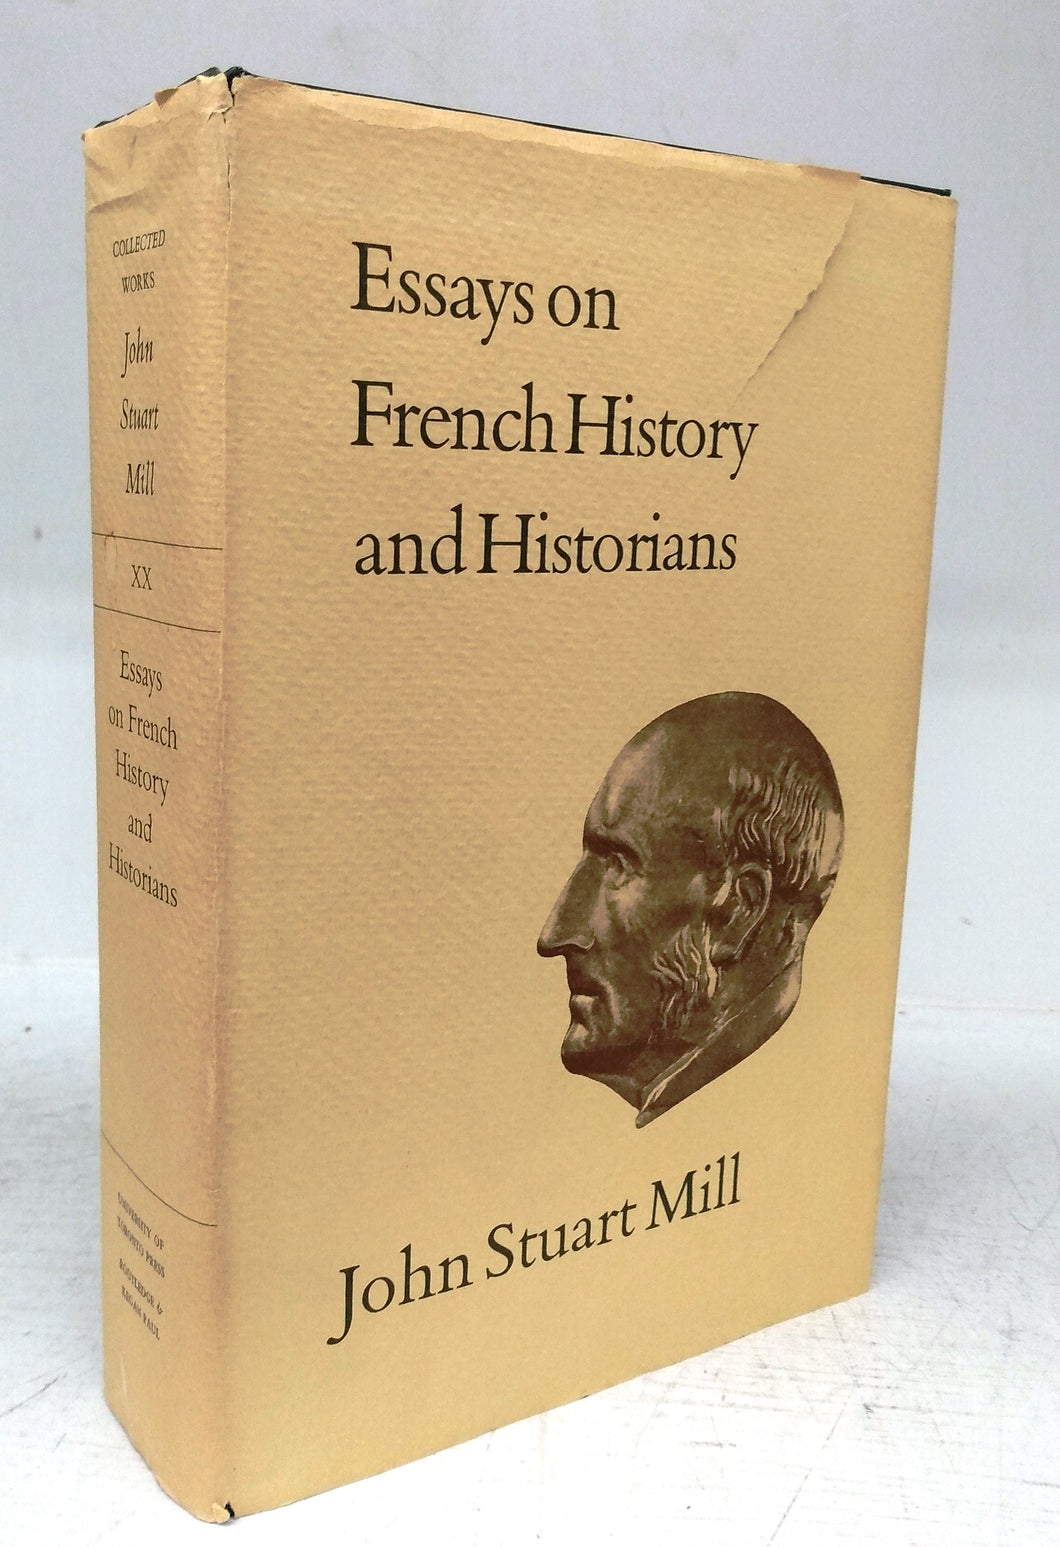 Essays on French History and Historians